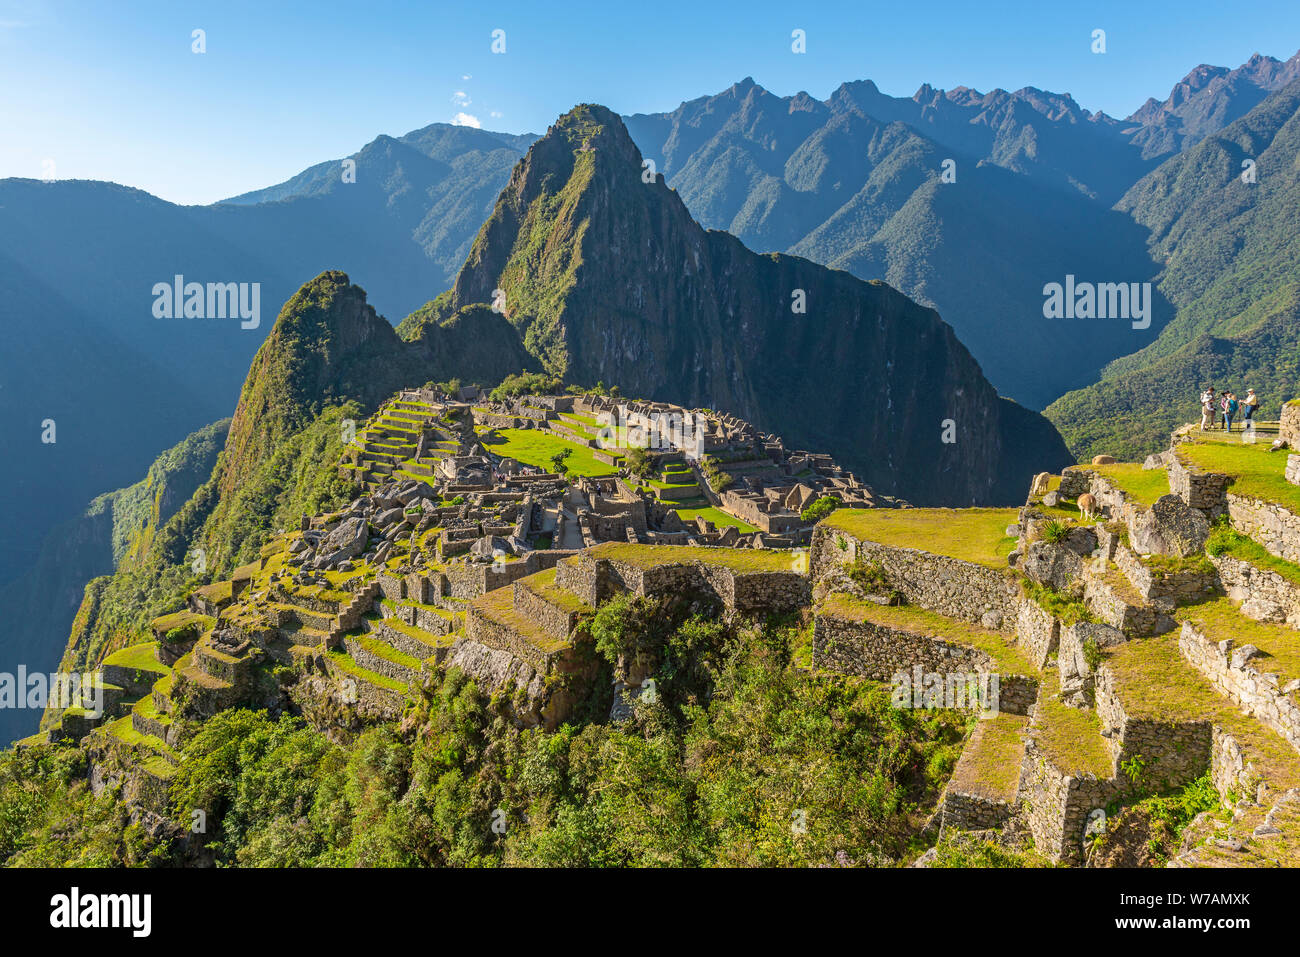 A few tourists enjoying the view from the agriculture terraces over the lost inca ruin of Machu Picchu at sunset, Cusco, Peru. Stock Photo